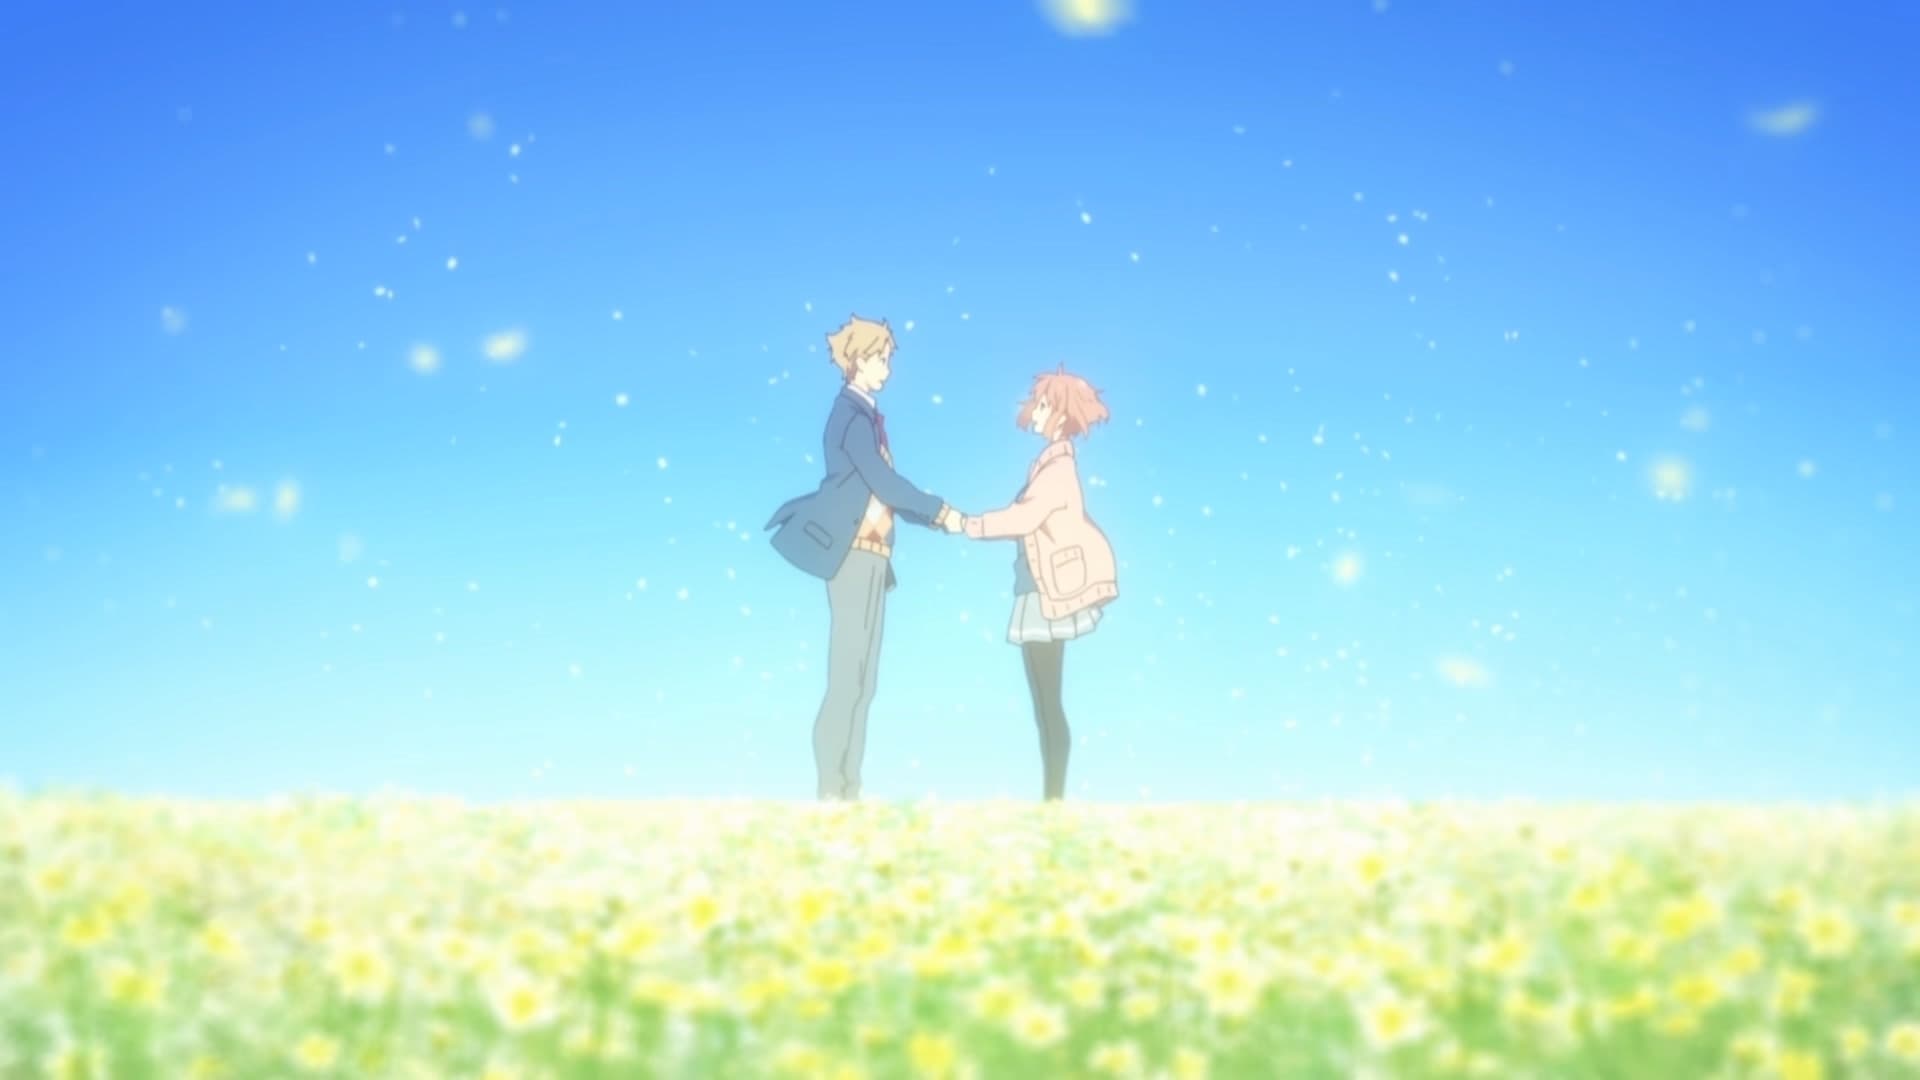 Beyond the Boundary: I'll Be Here – Future